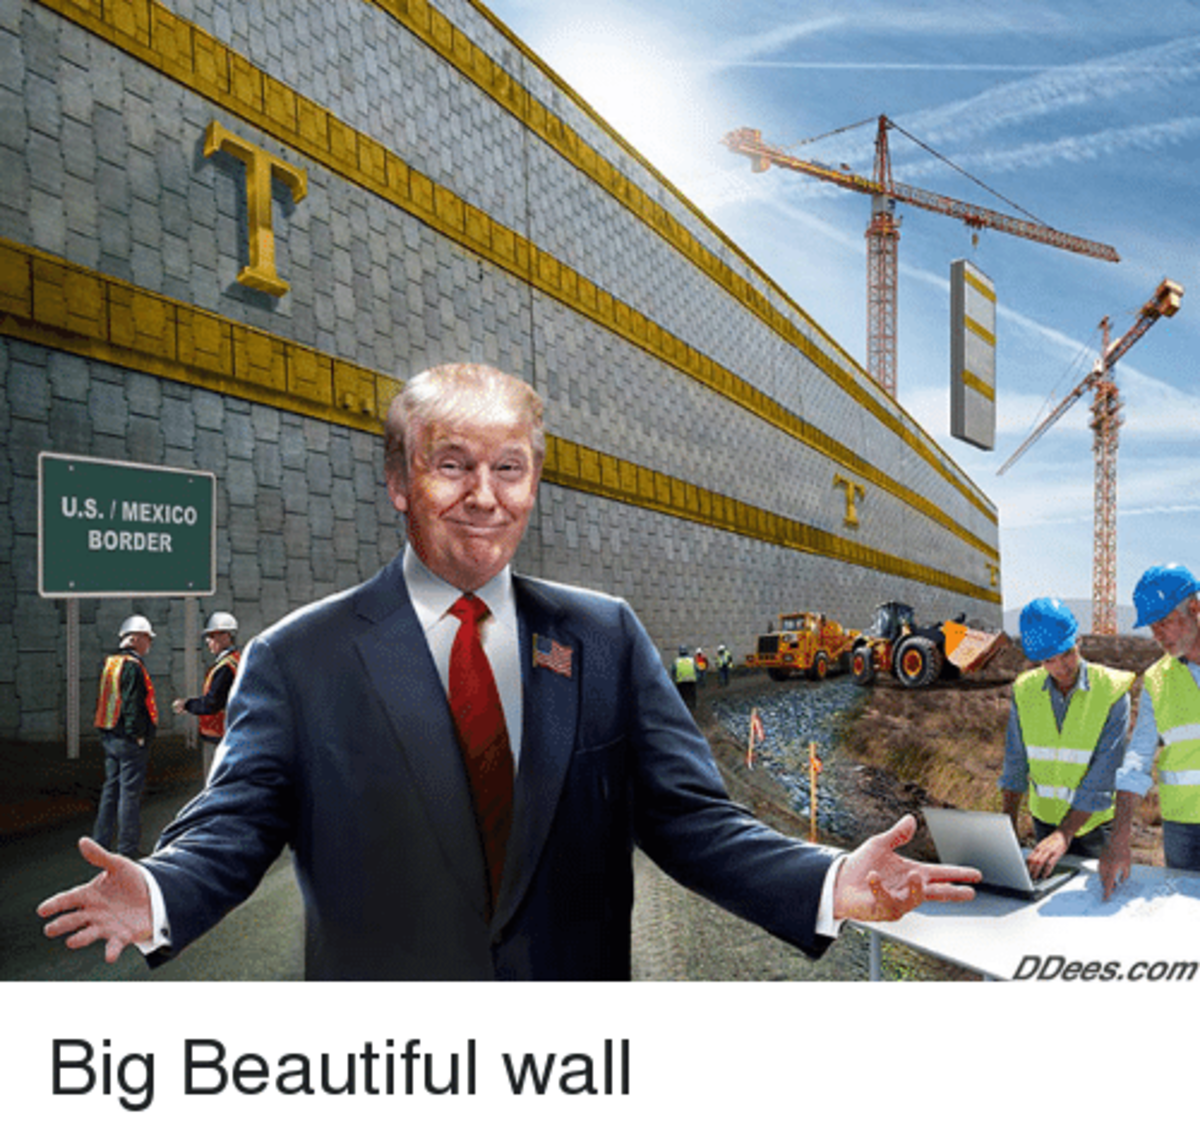 Build the Wall